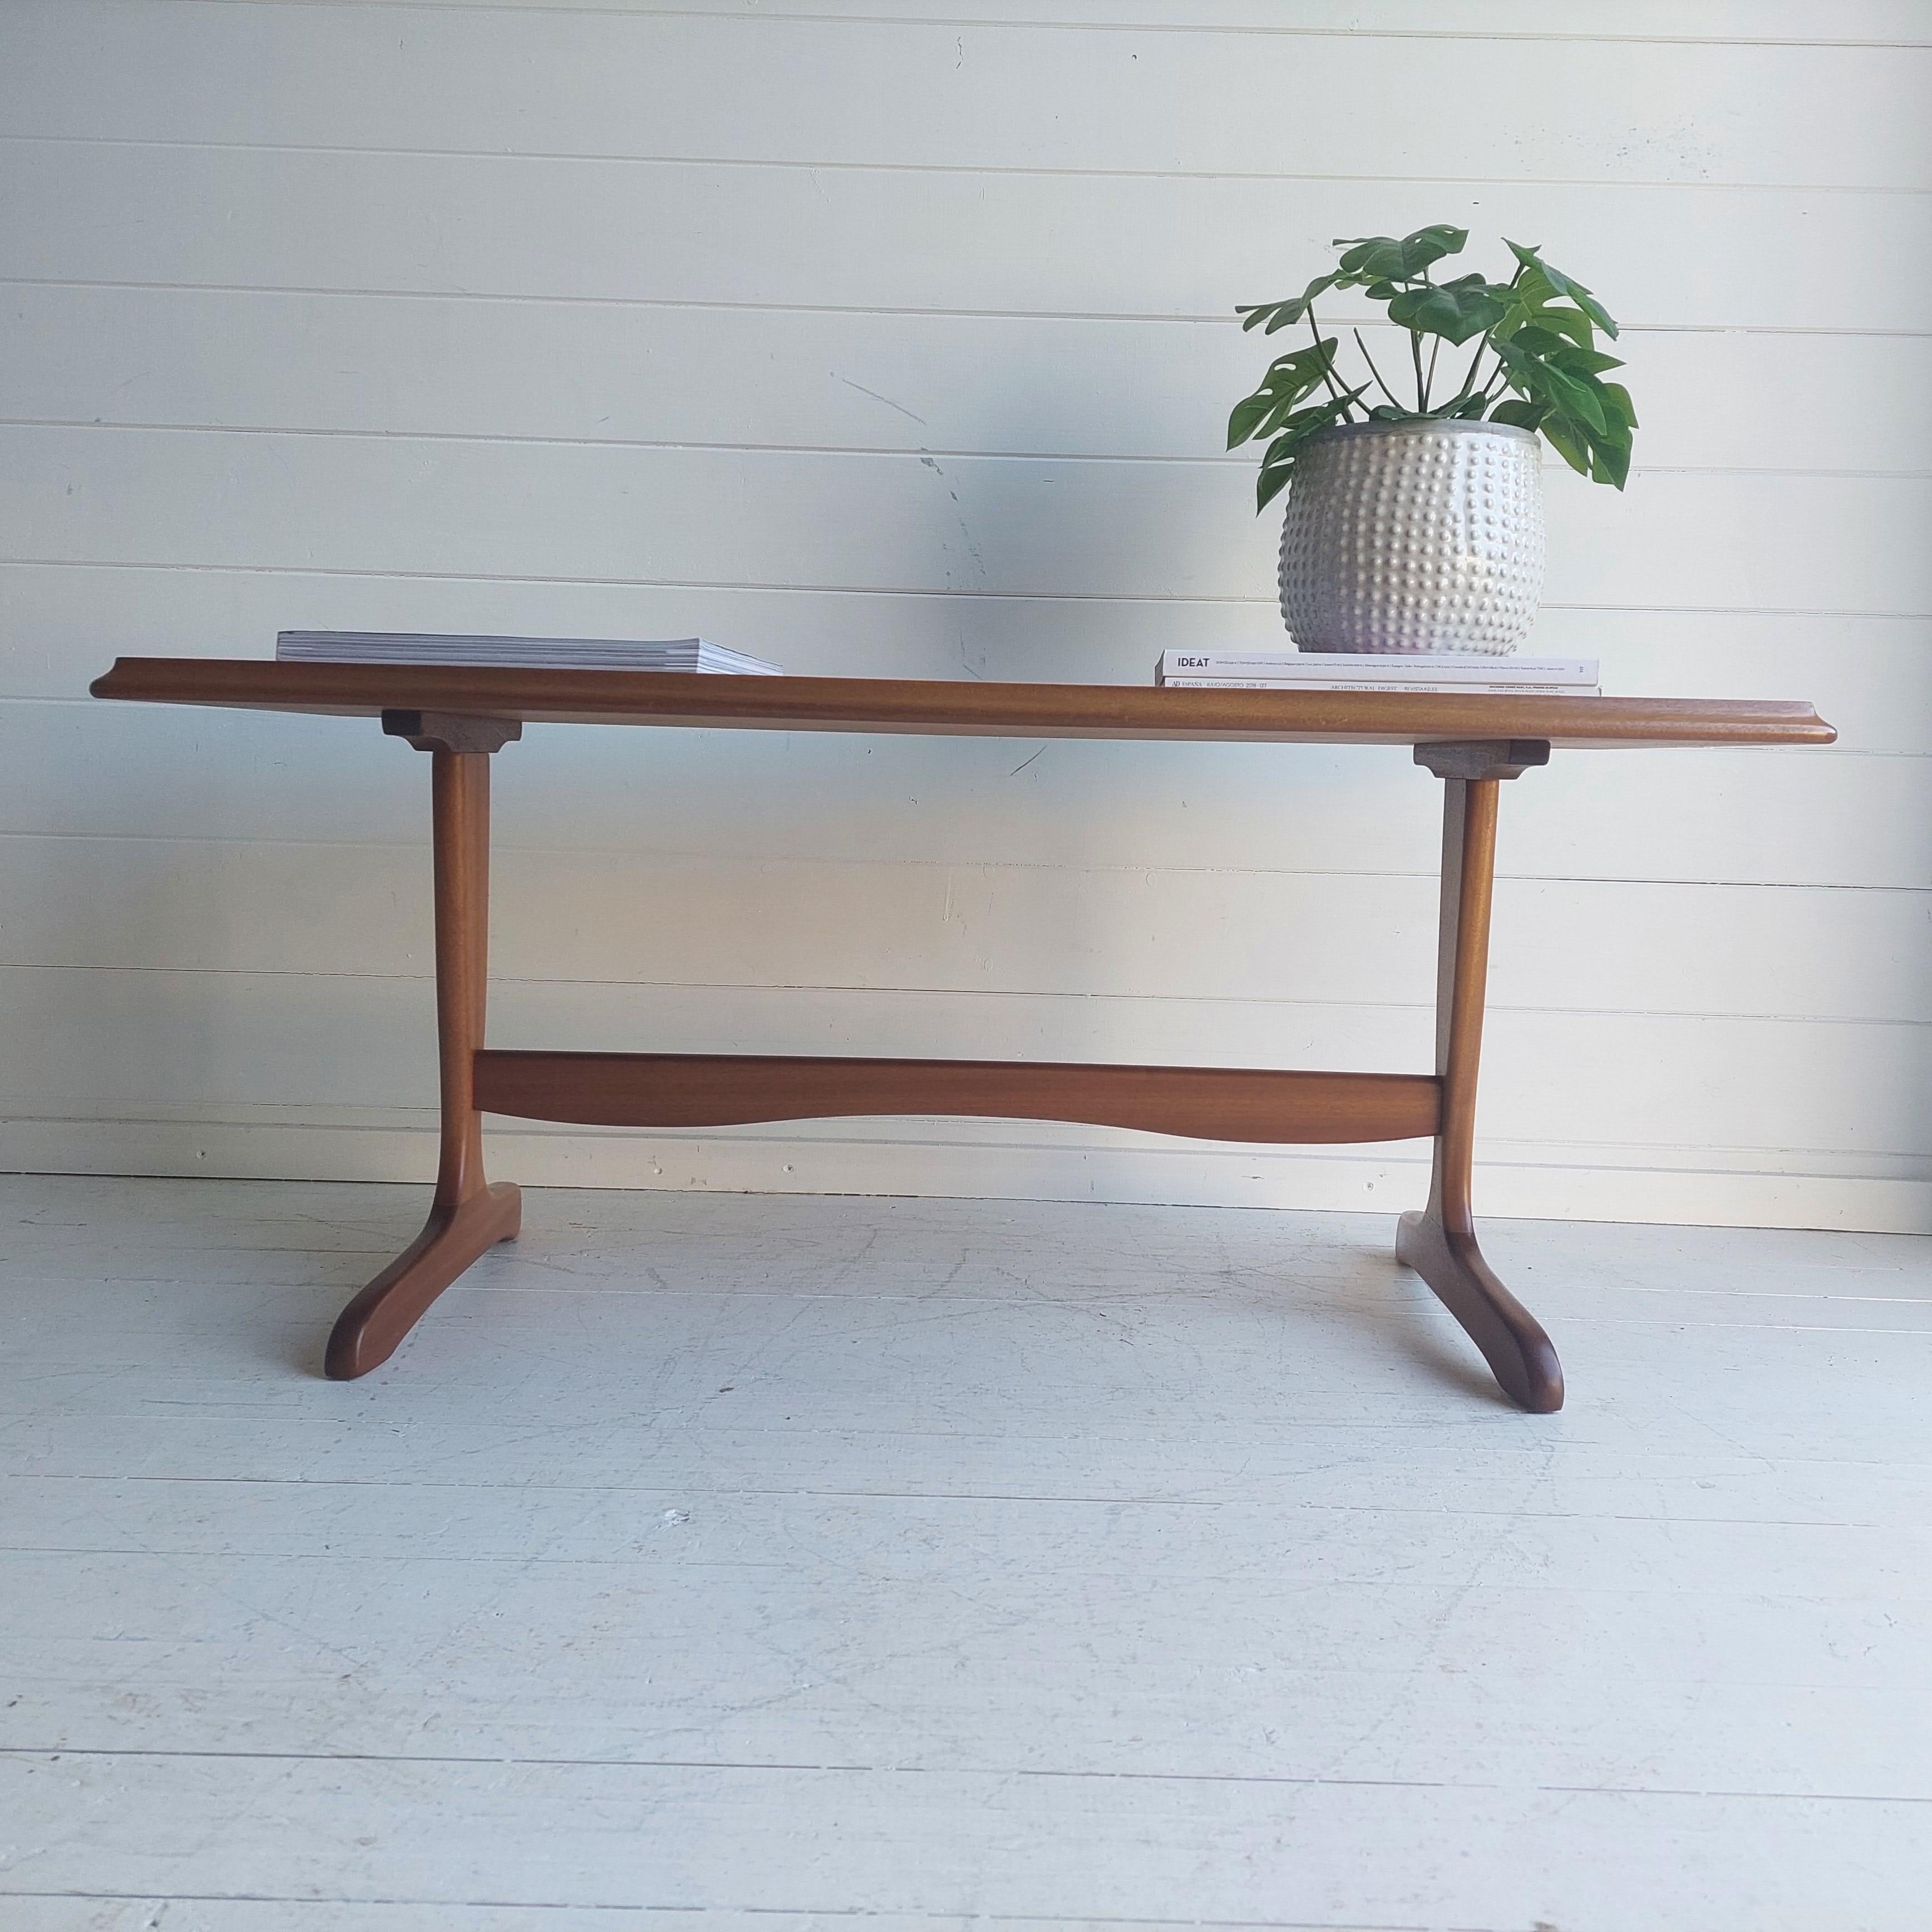 20th Century Late Mid Century Teak Coffee Table by Stucliffe Gplan Style, 80s For Sale